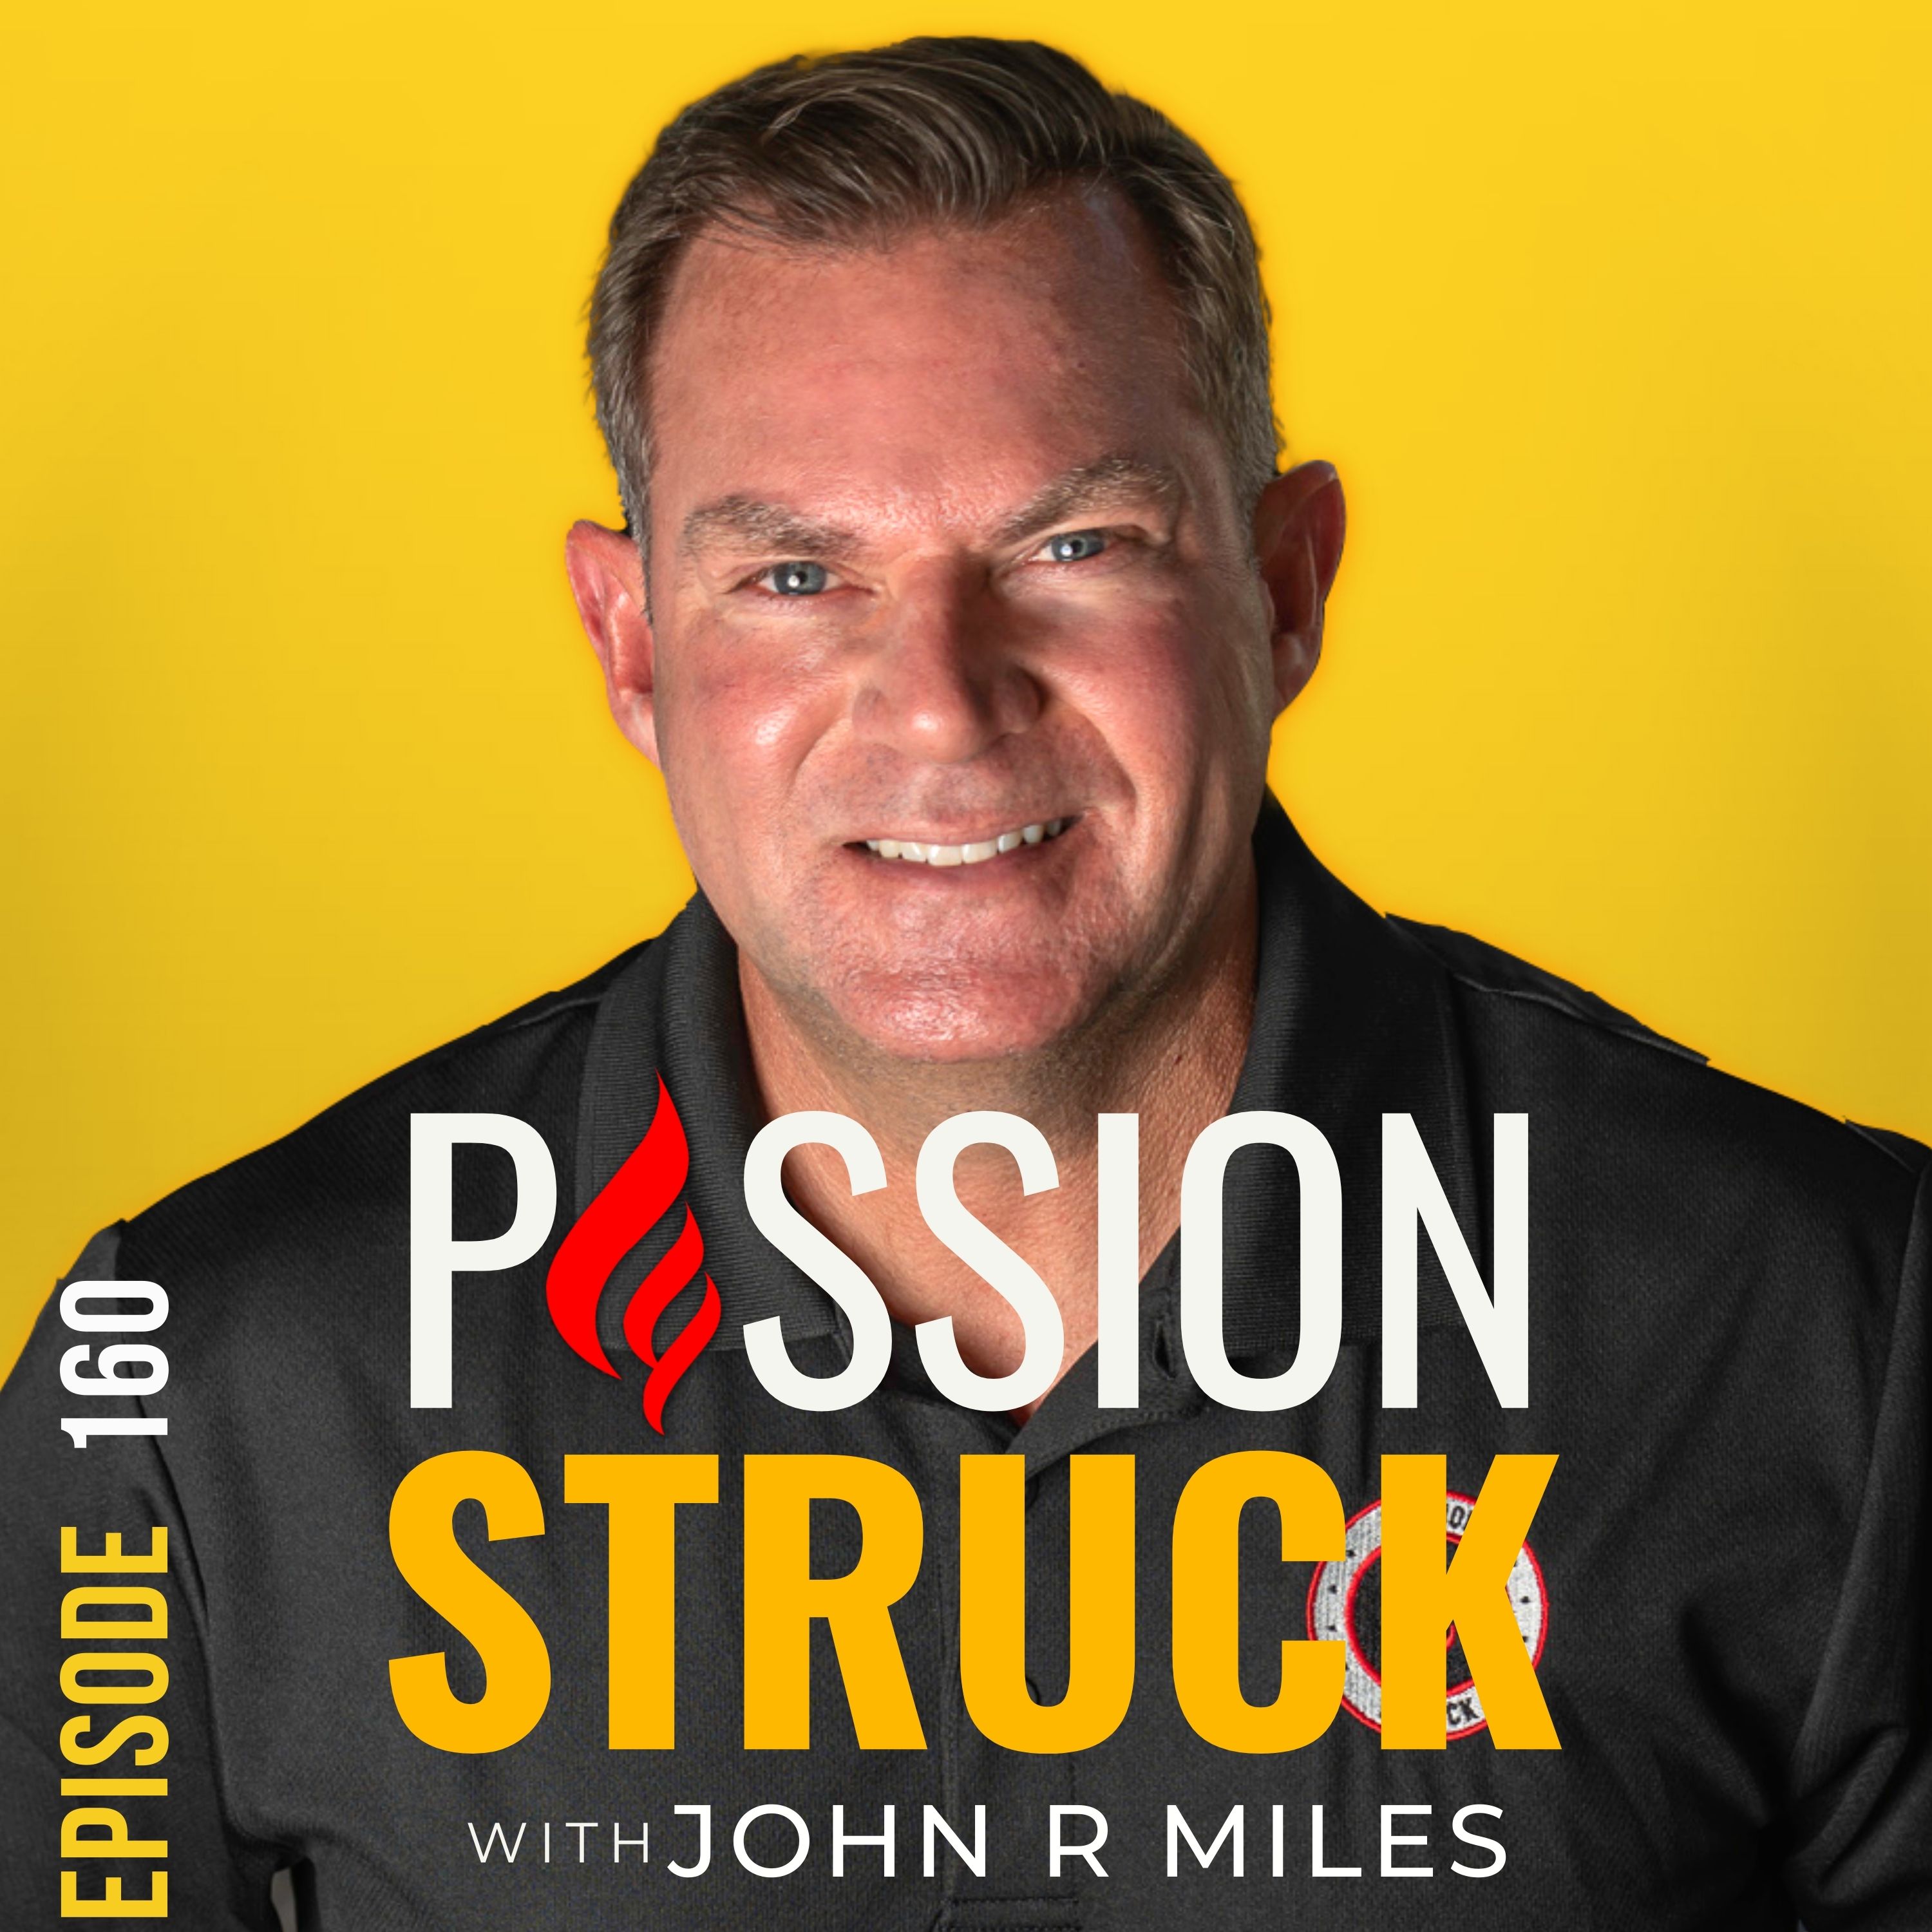 Passion Struck with John R. Miles episode 160 on the powerful benefits of meditation